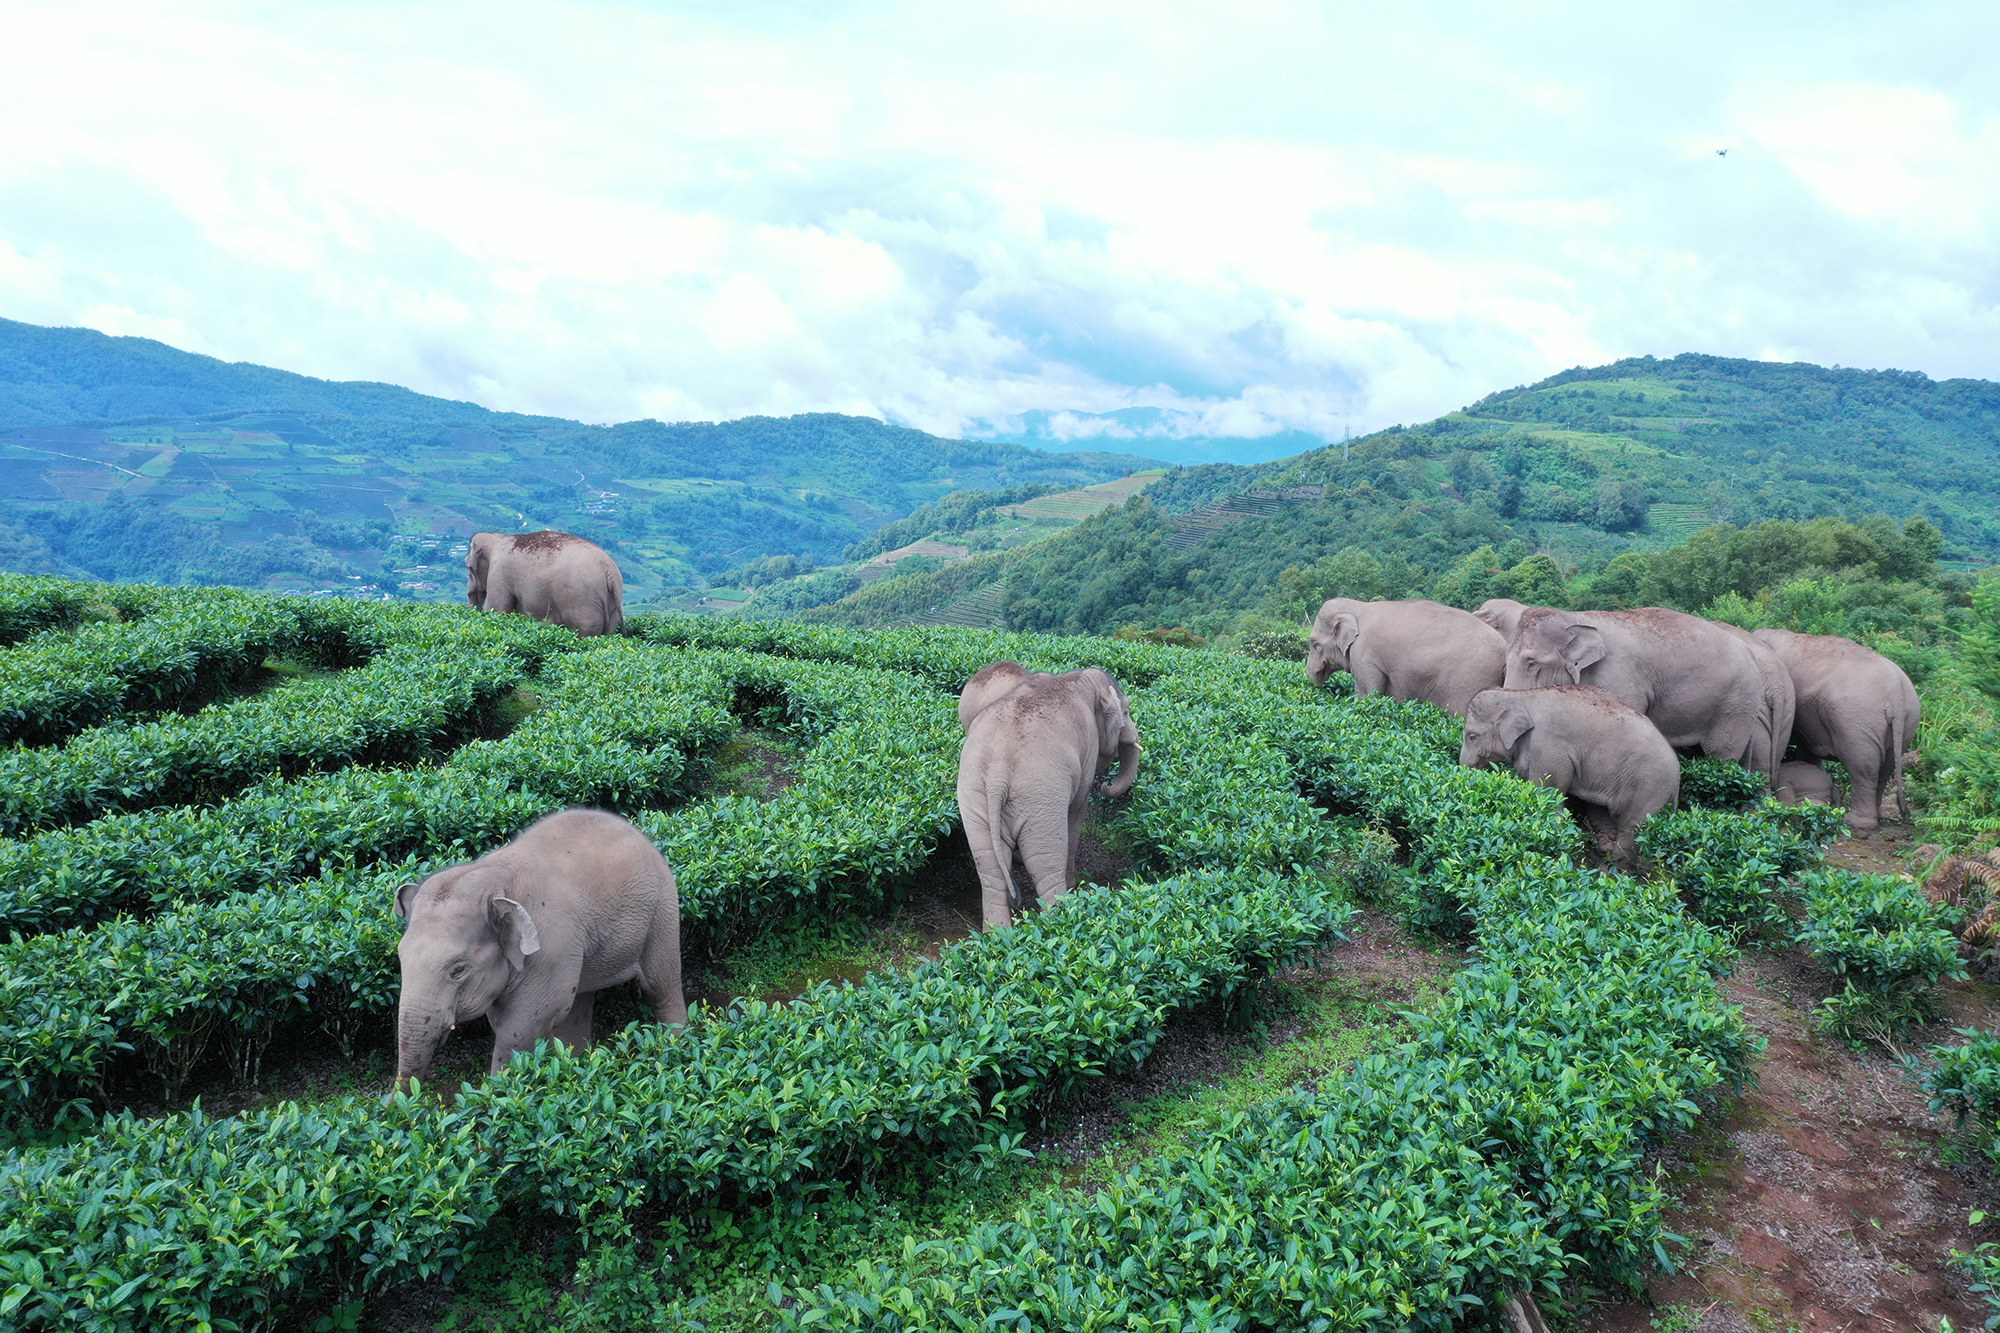 At least seven elephants walk around an agricultural field